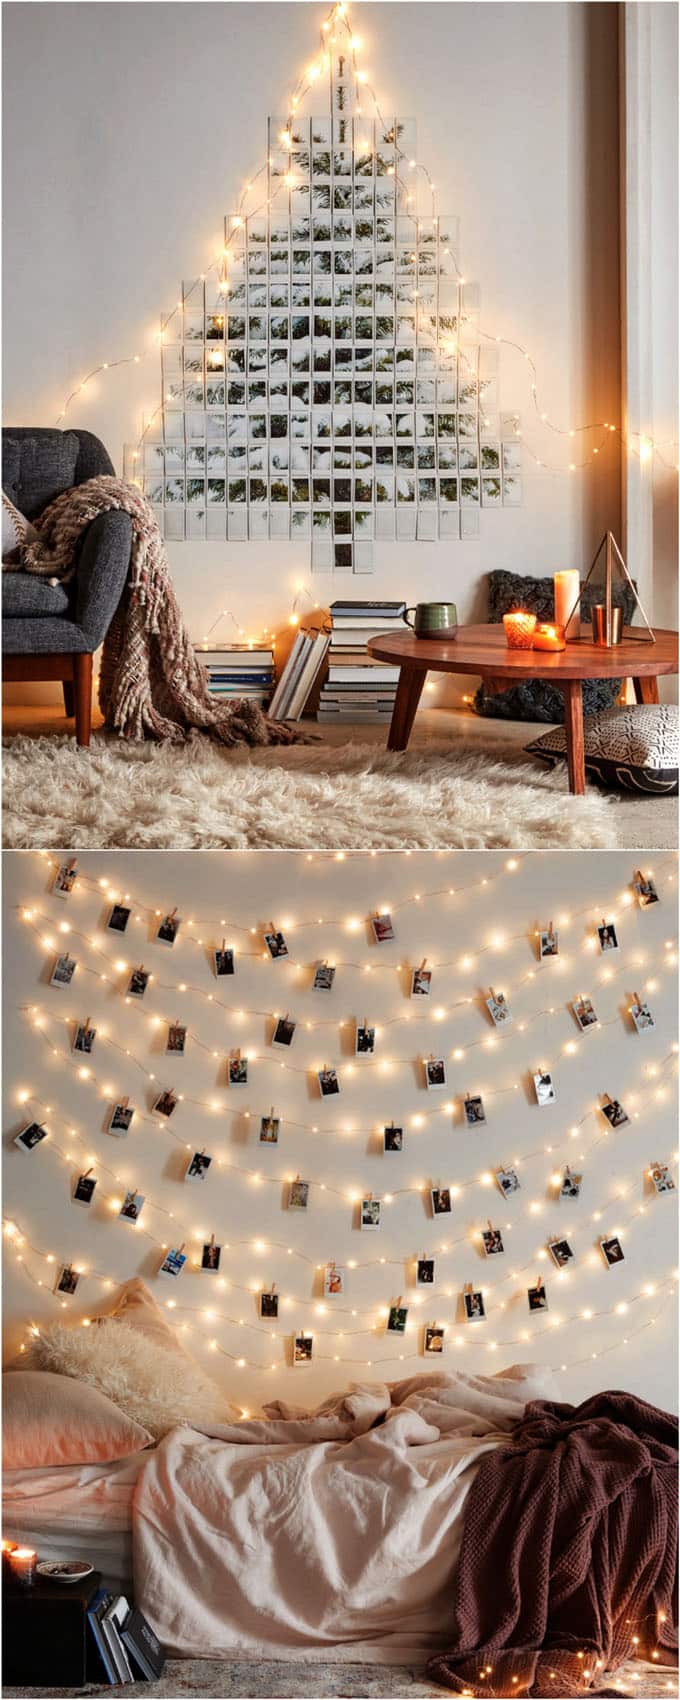 50 Fairy Lights Decorating Ideas: Create Magical Atmosphere in Any Room